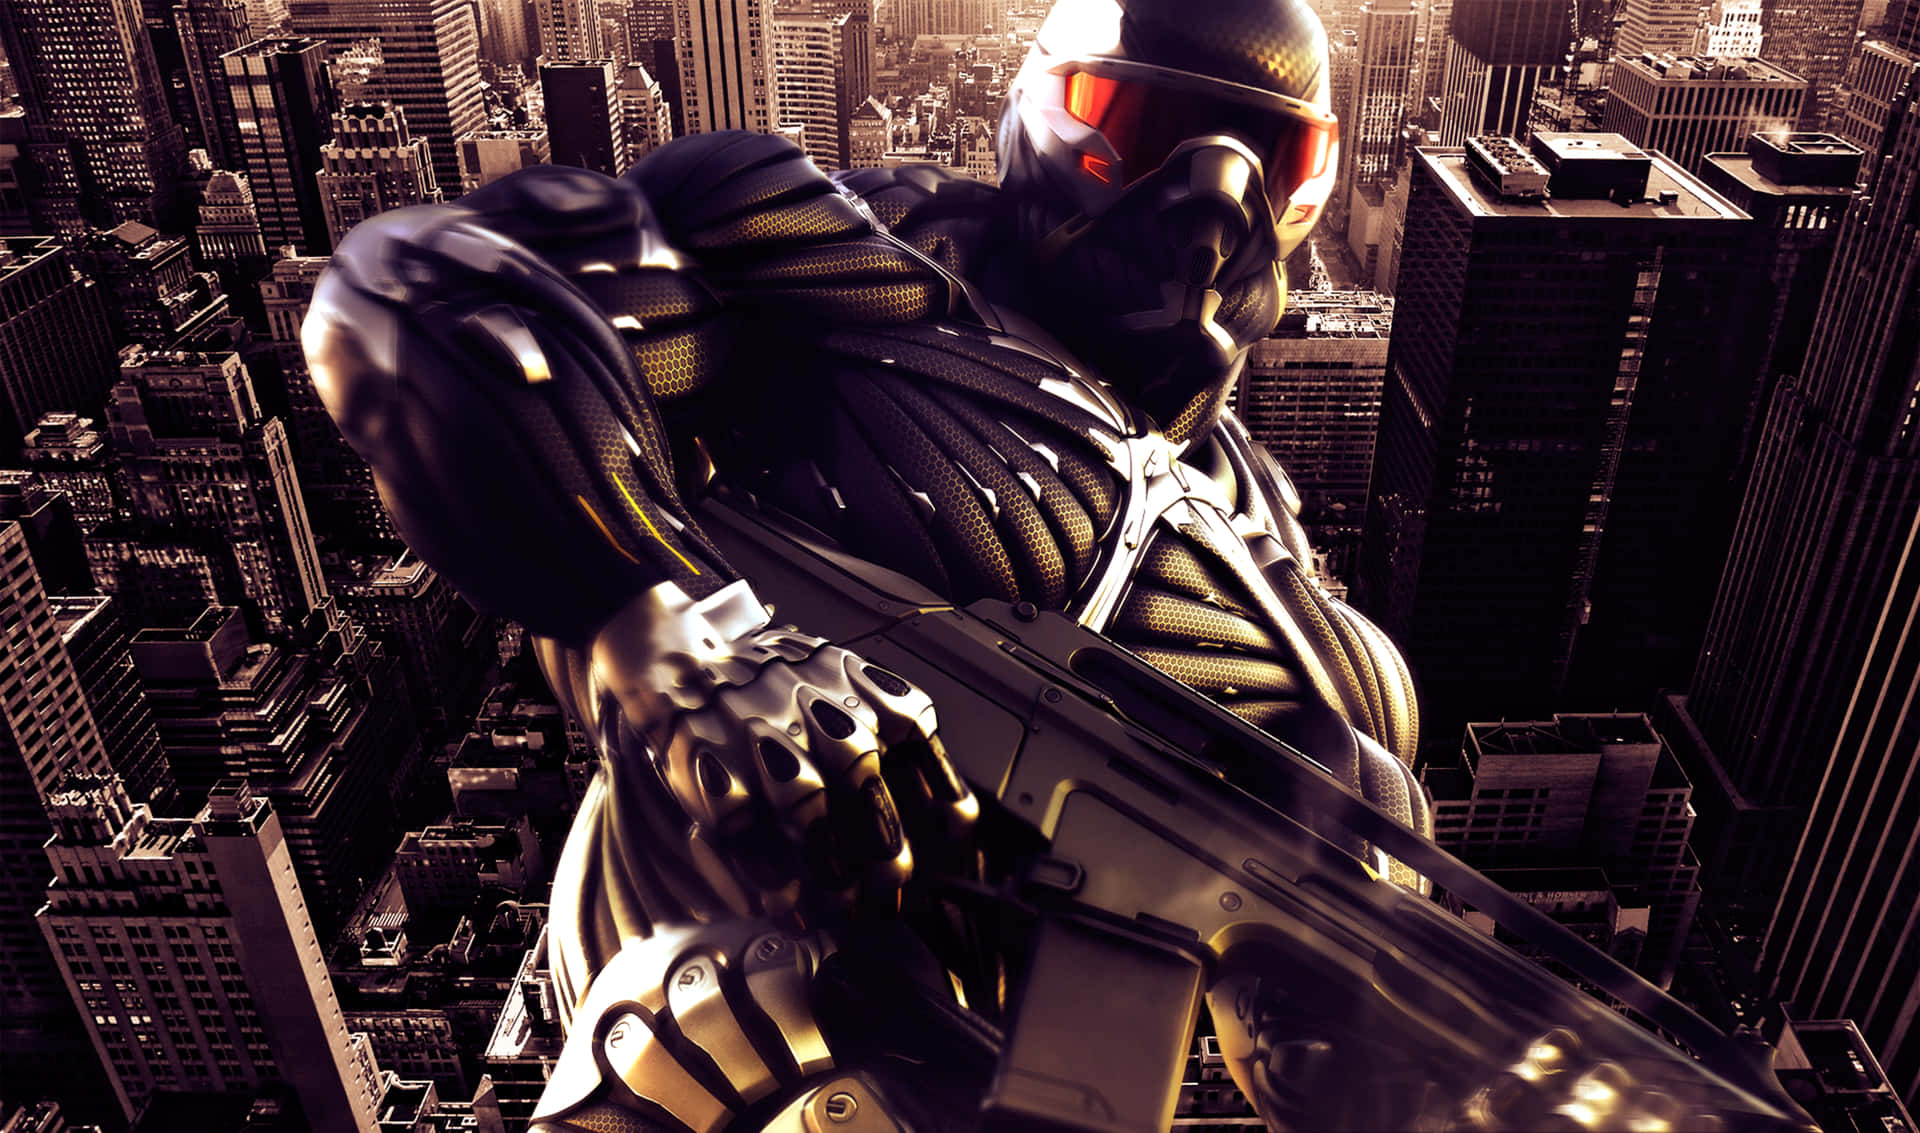 Power Up Your Imagination with 2440x1440 Crysis 3 Wallpaper